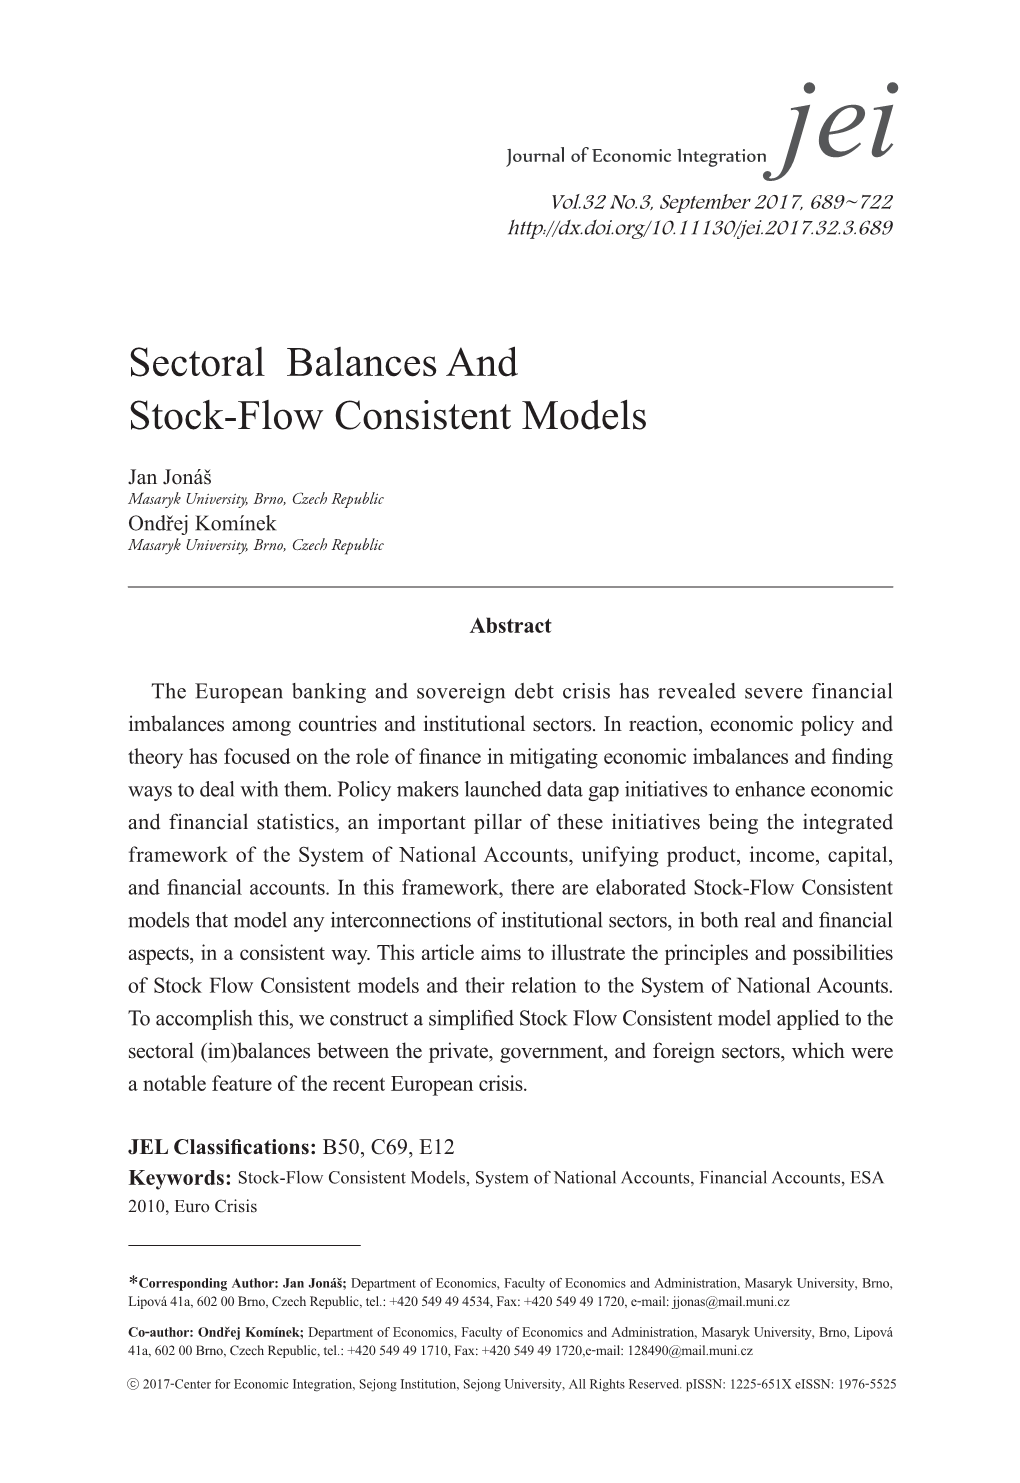 Sectoral Balances and Stock-Flow Consistent Models